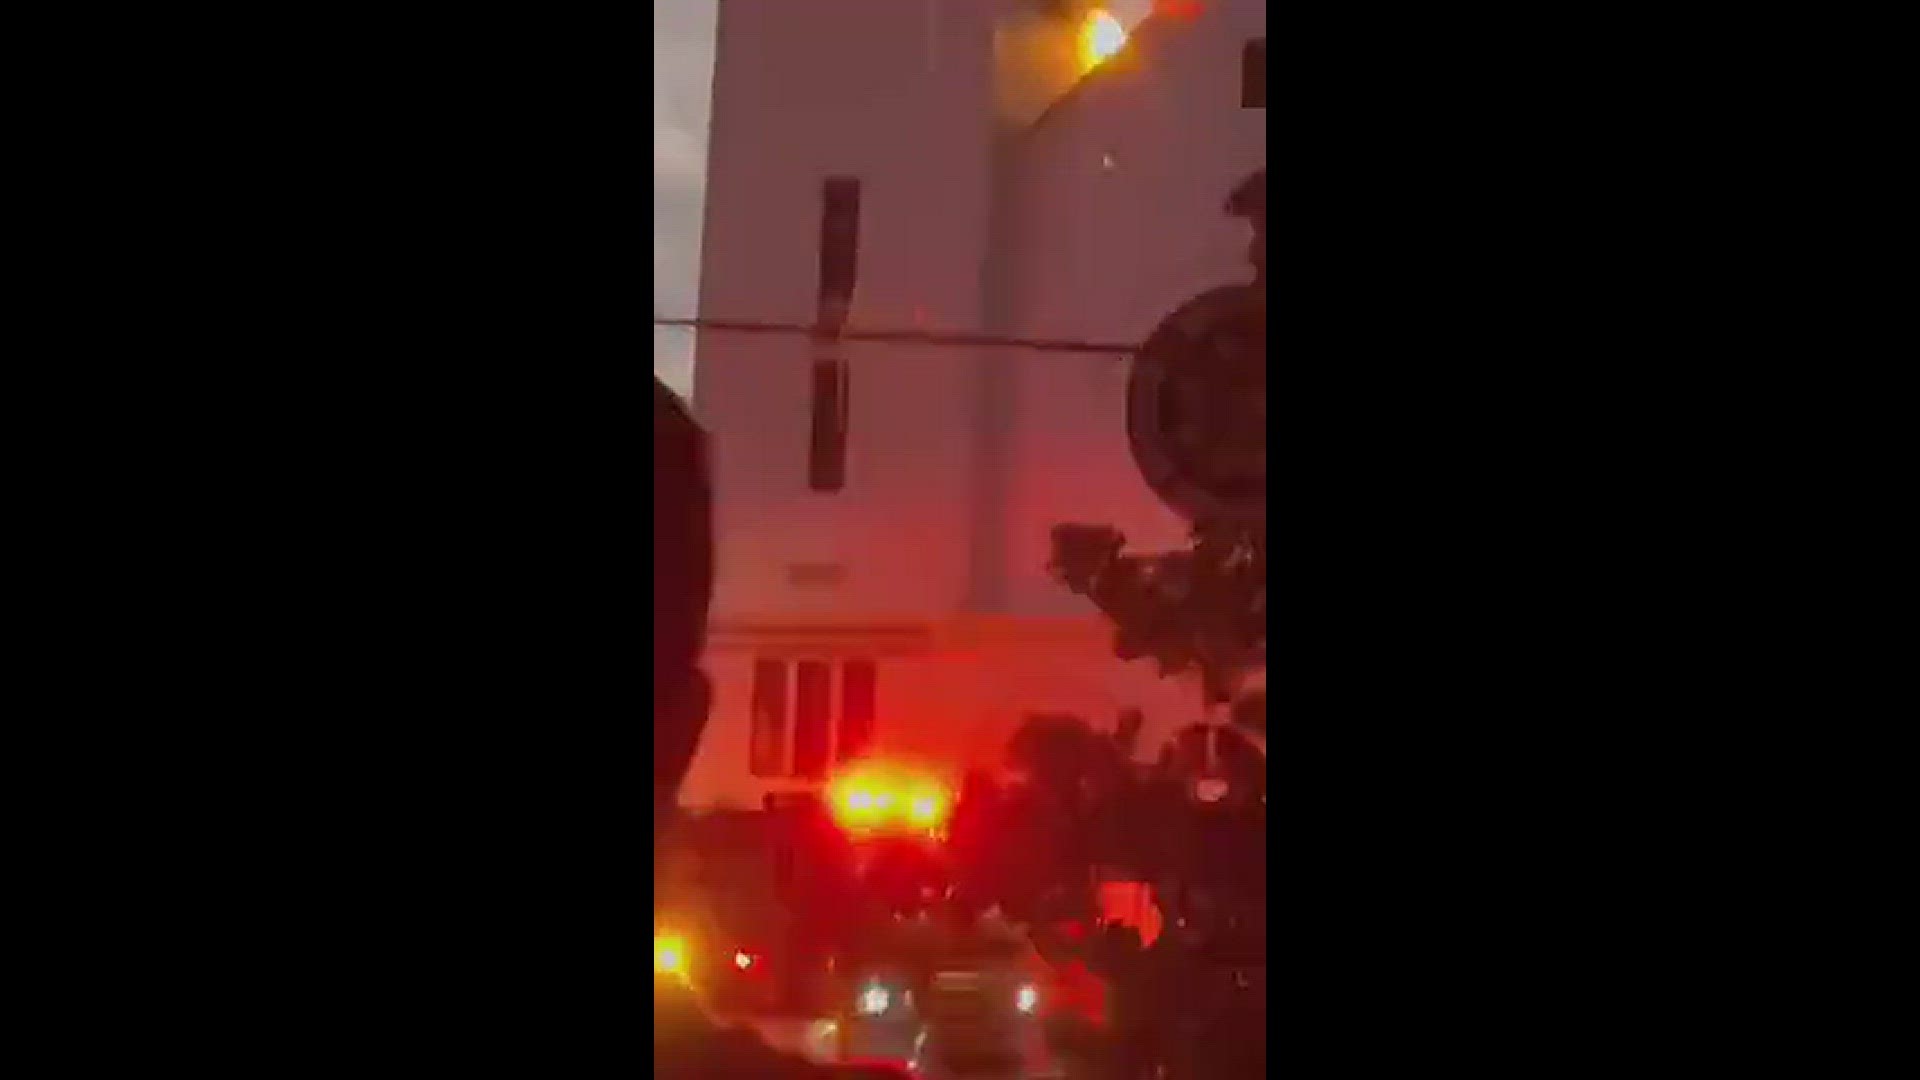 Church hit by lightning on the 100 block of Division Ave SE
Credit: Lily